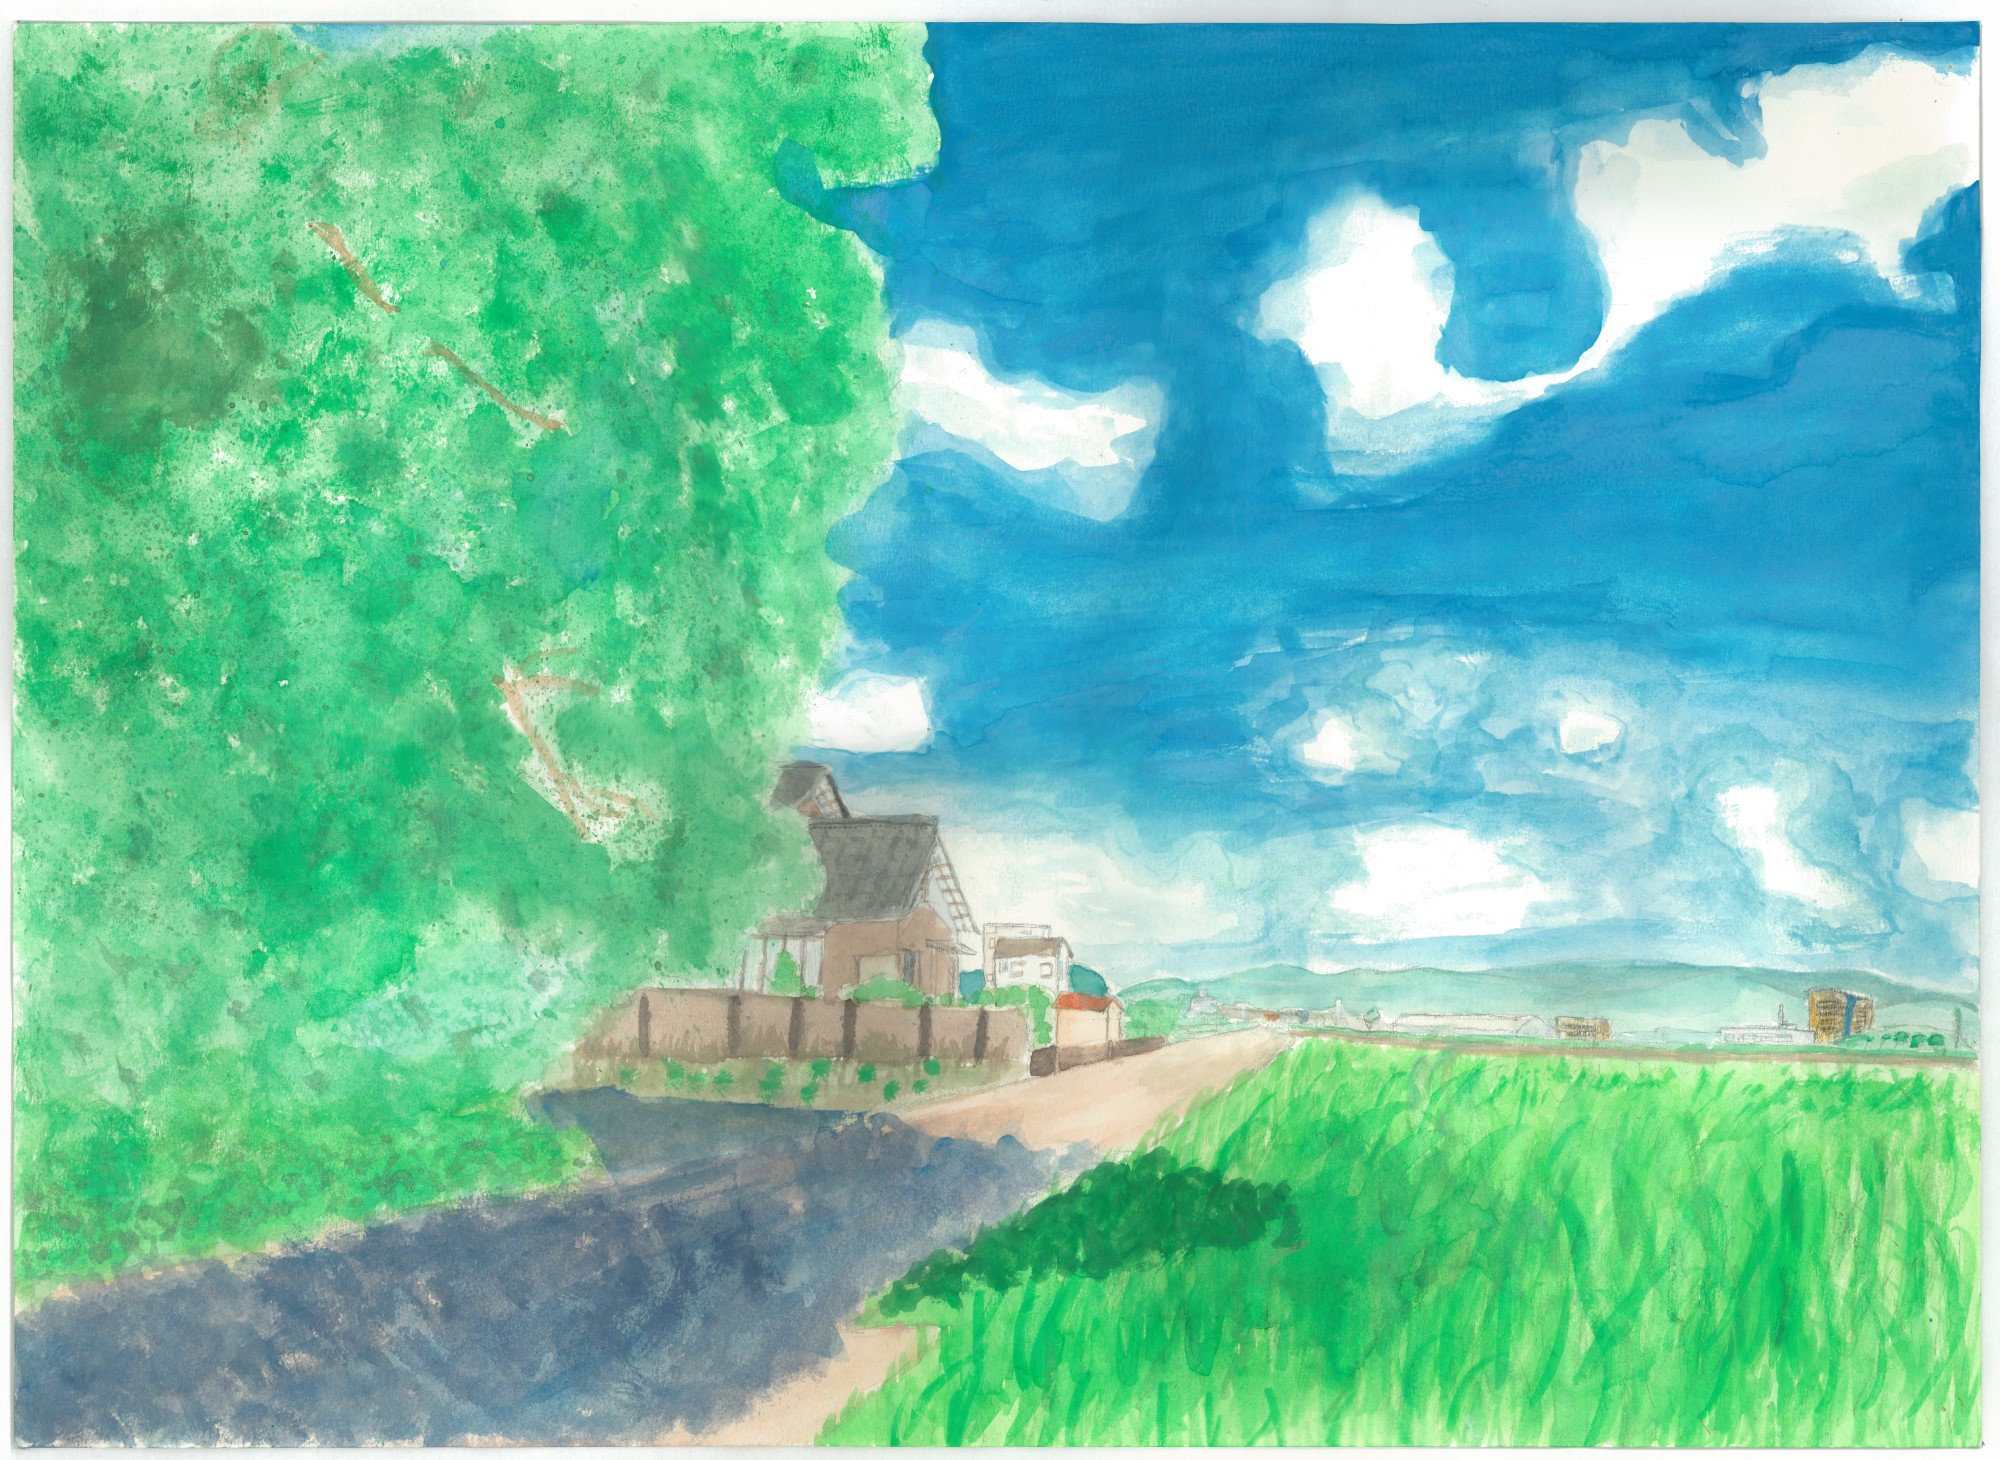 student artwork - village with blue sky and greenery